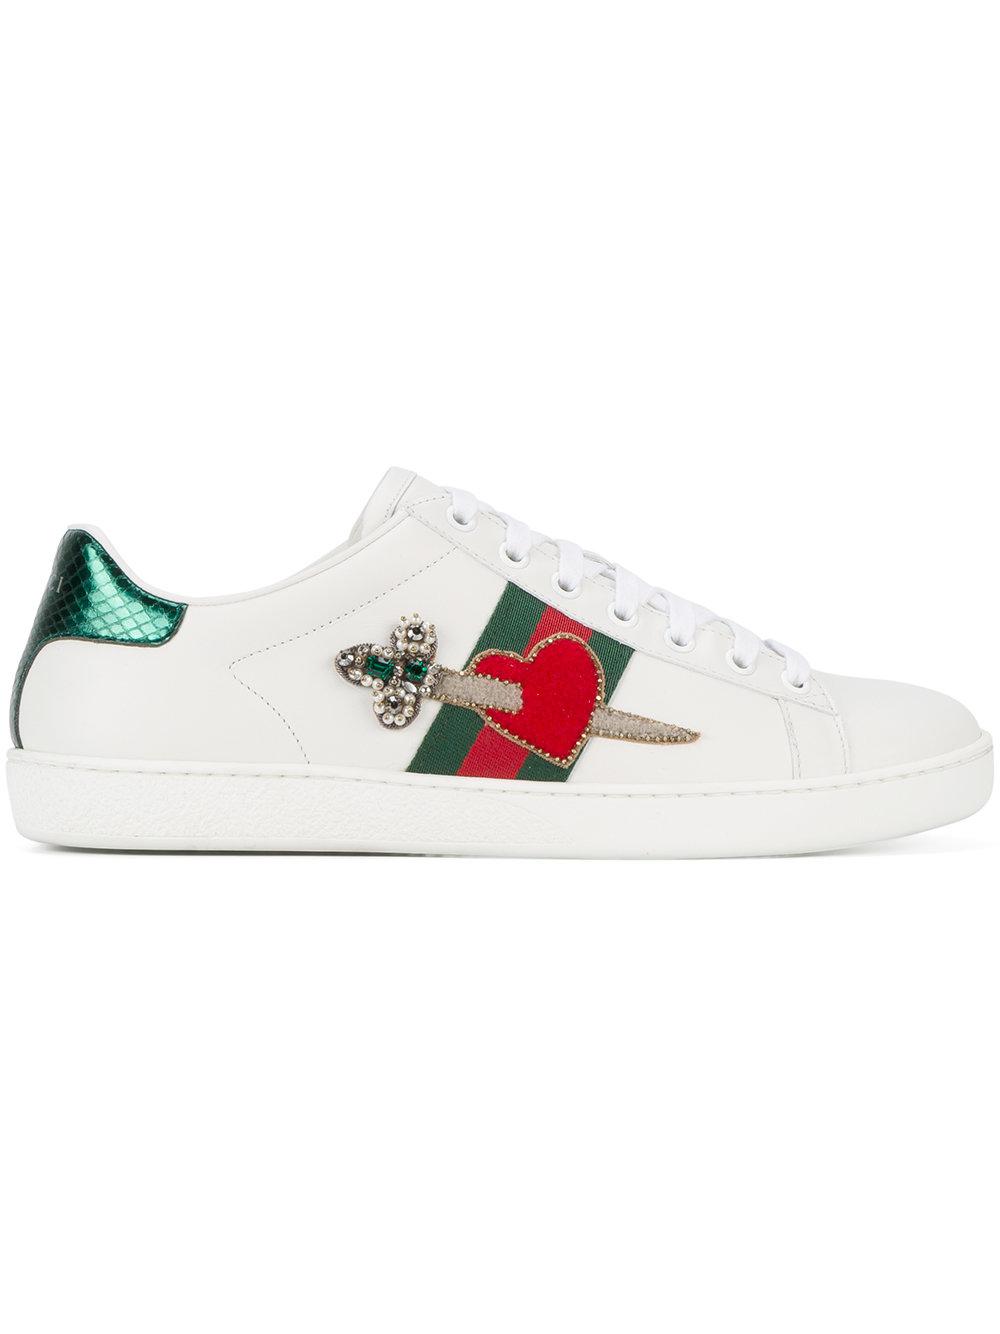 Gucci Heart Dagger Ace Sneakers in White | Lyst